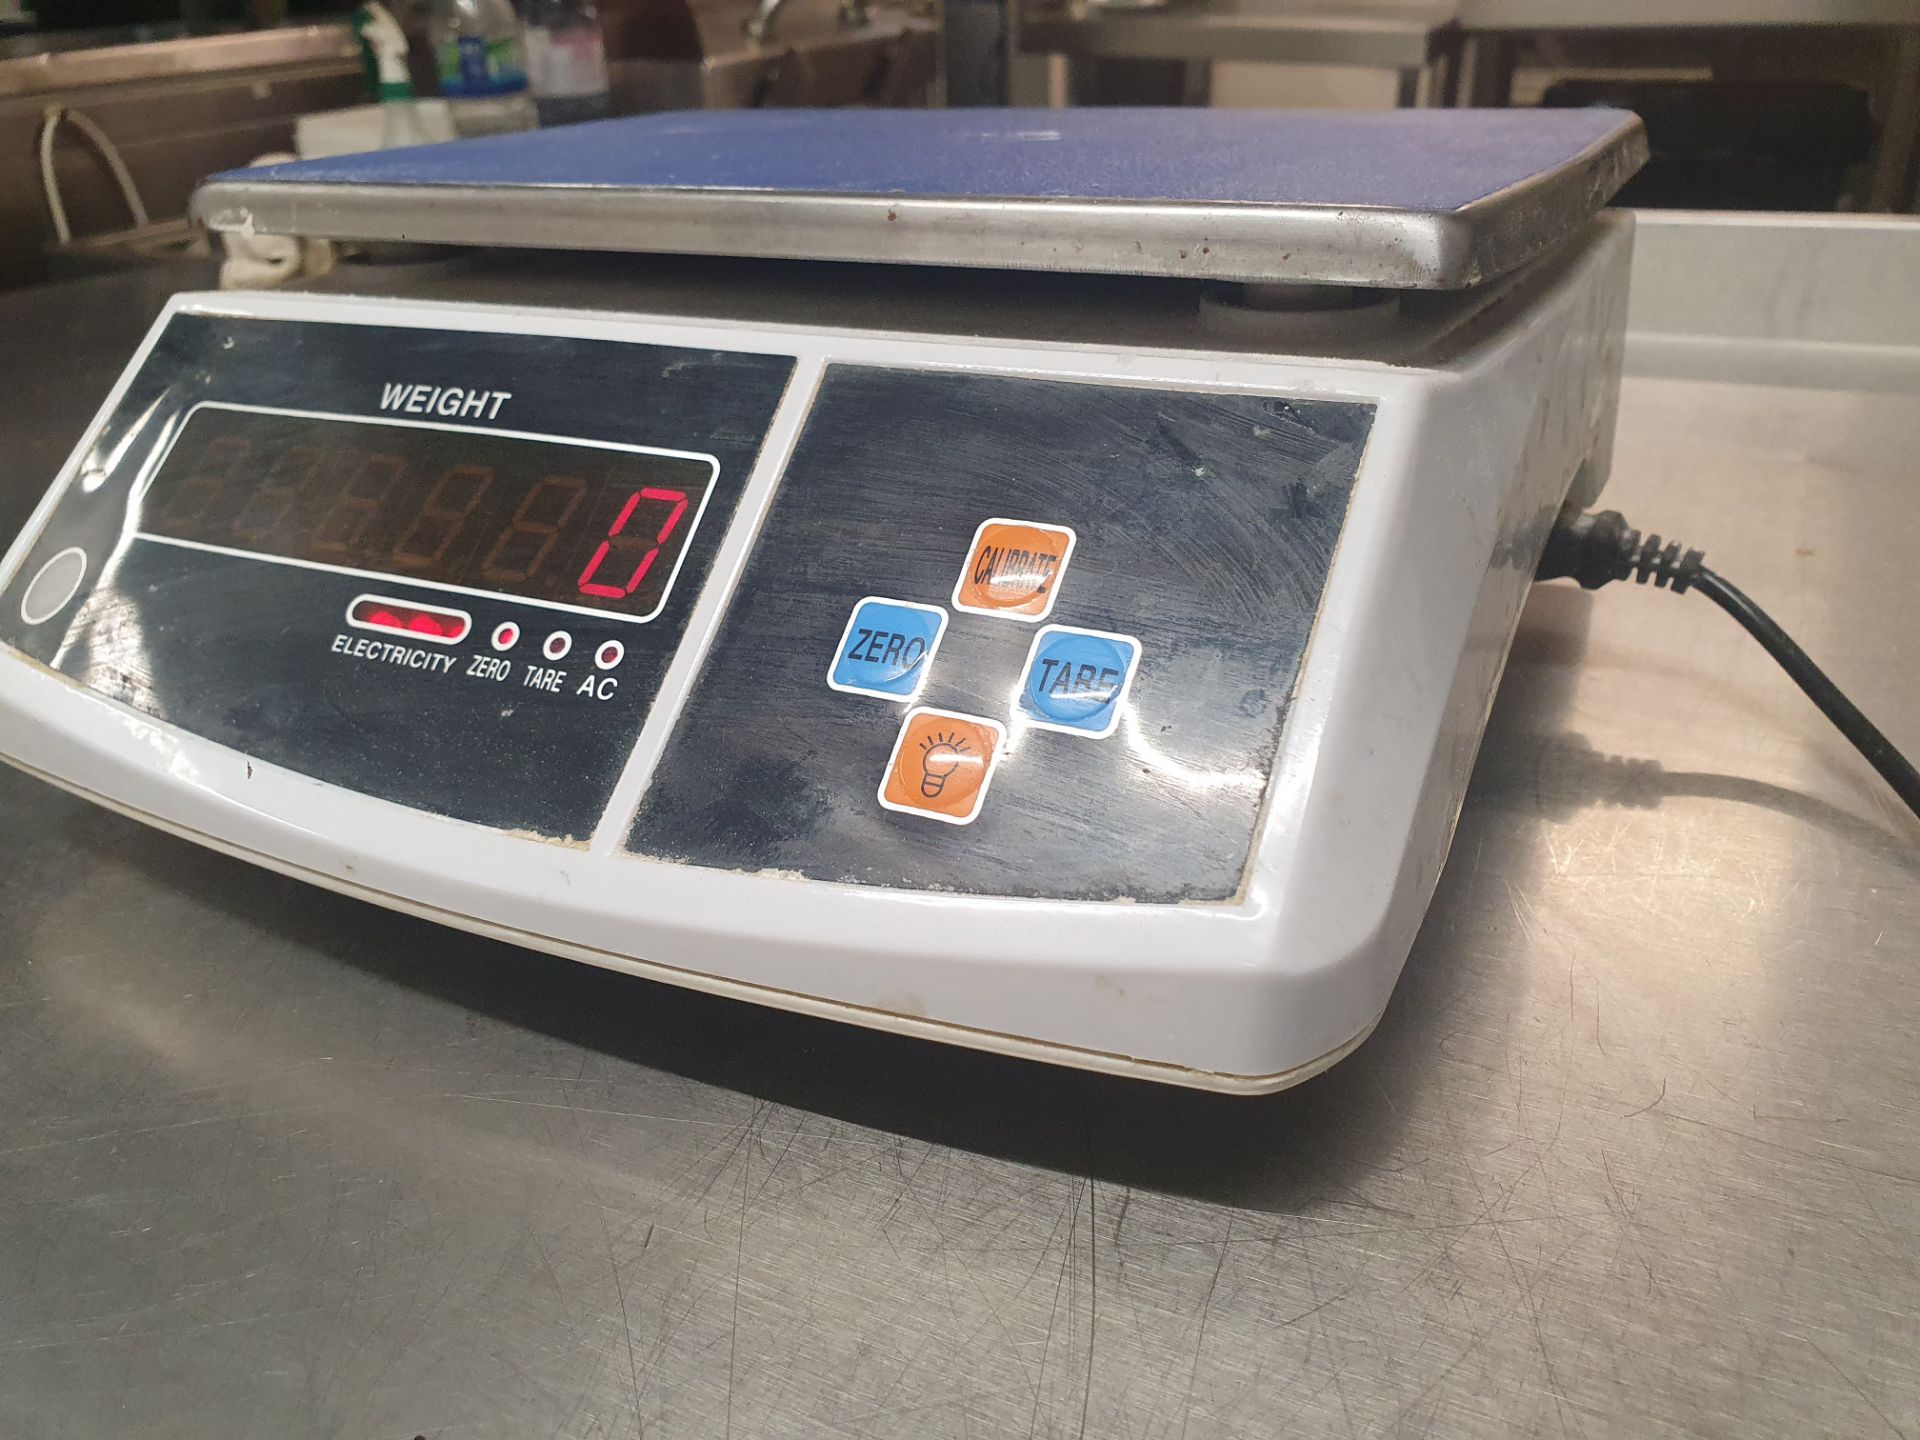 Digital Kitchen Scales. 30kgs Max. Capacity. New. Boxed - Image 7 of 9